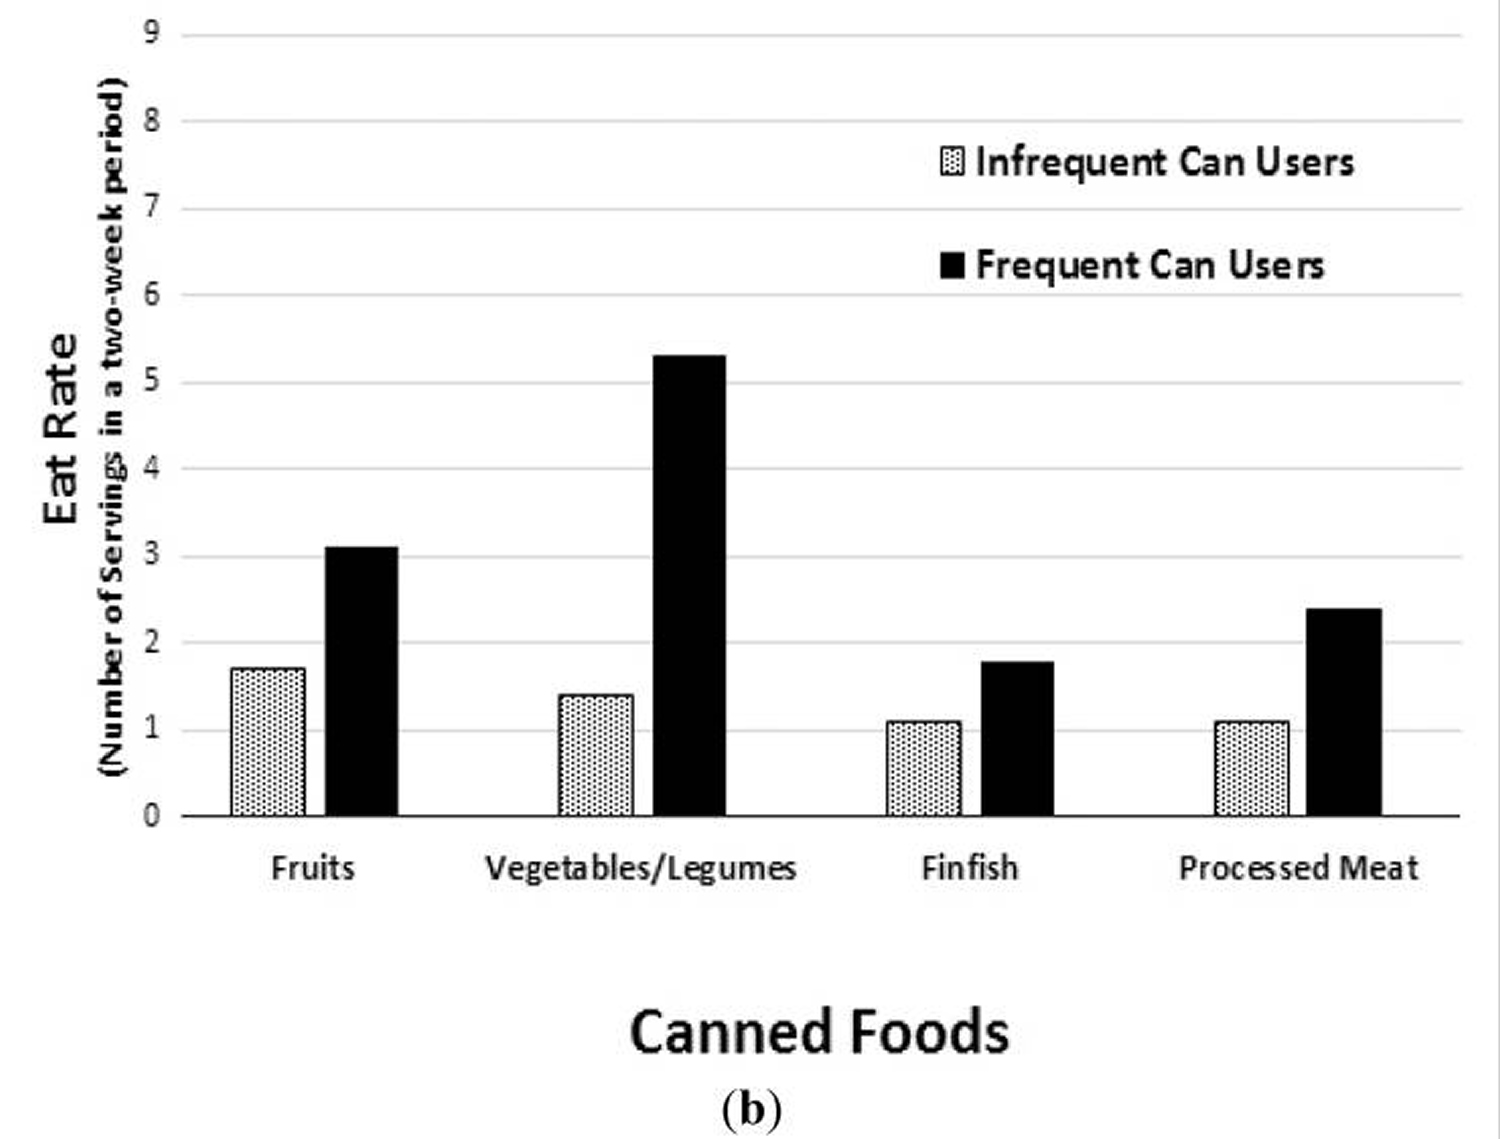 types of canned foods consumed between canned food users and non-canned food users